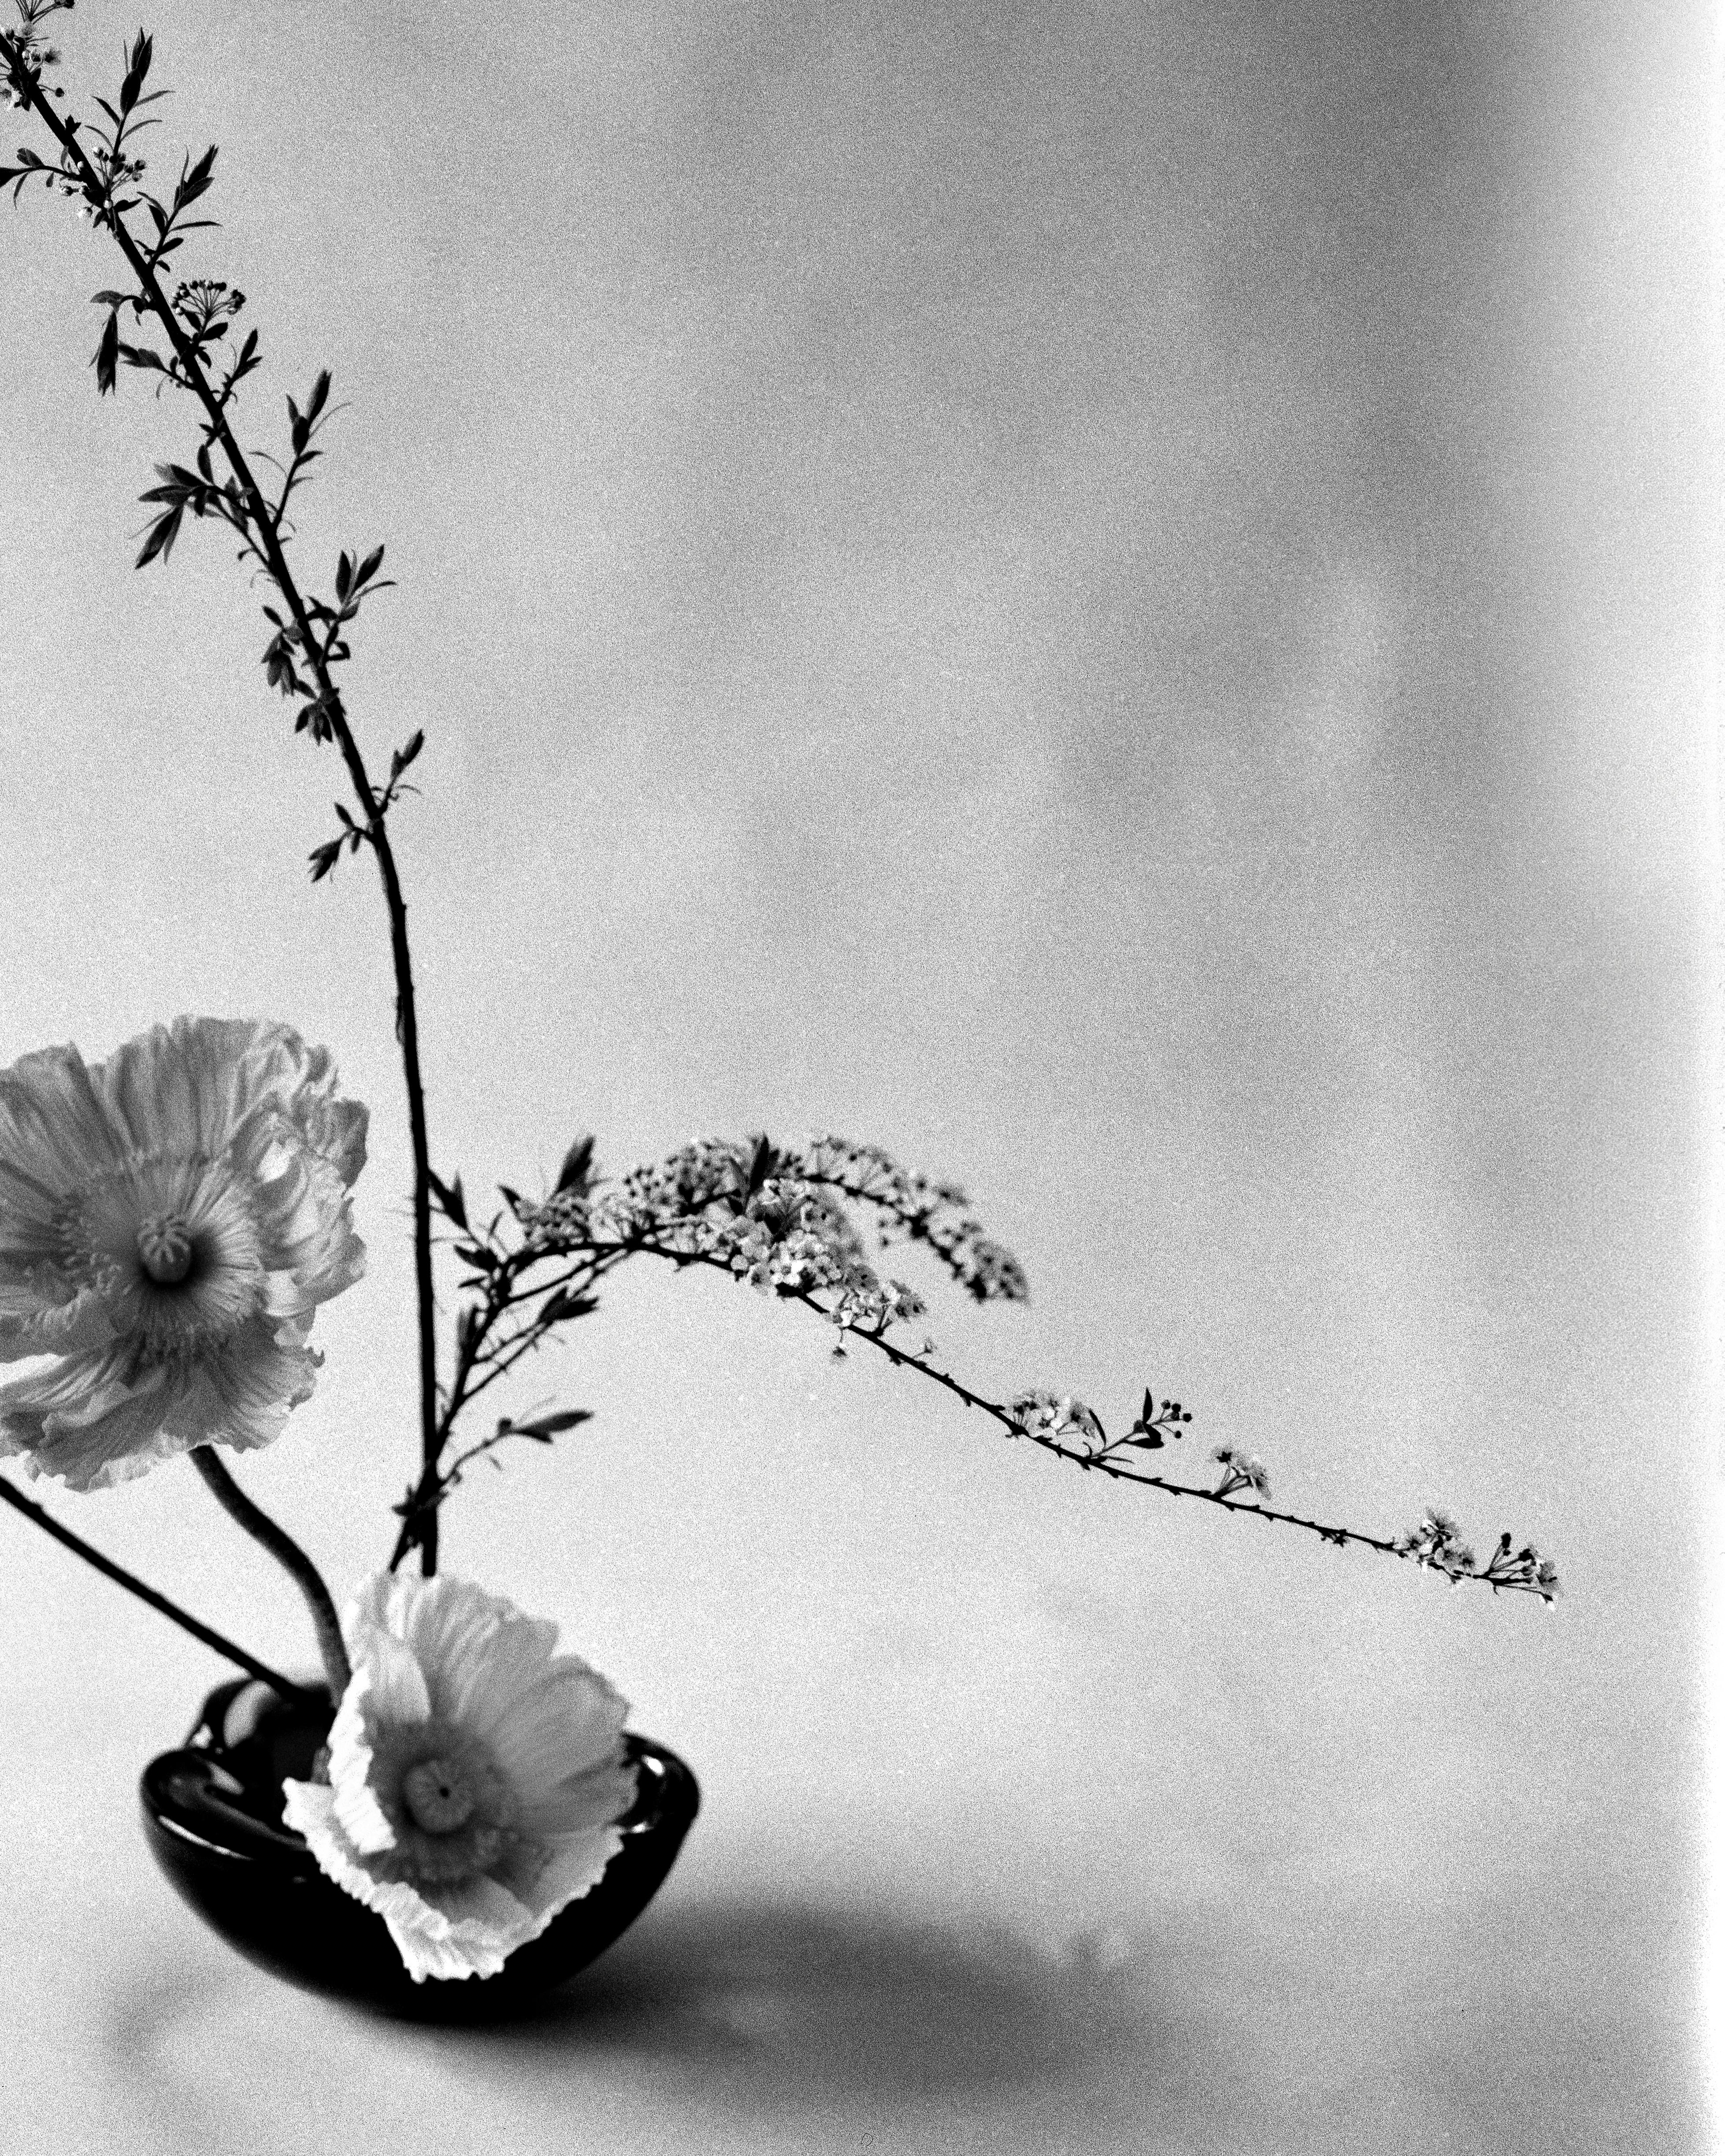 Ikebana - black and white flower arrangement, Limited edition of 20 - Contemporary Photograph by Ugne Pouwell